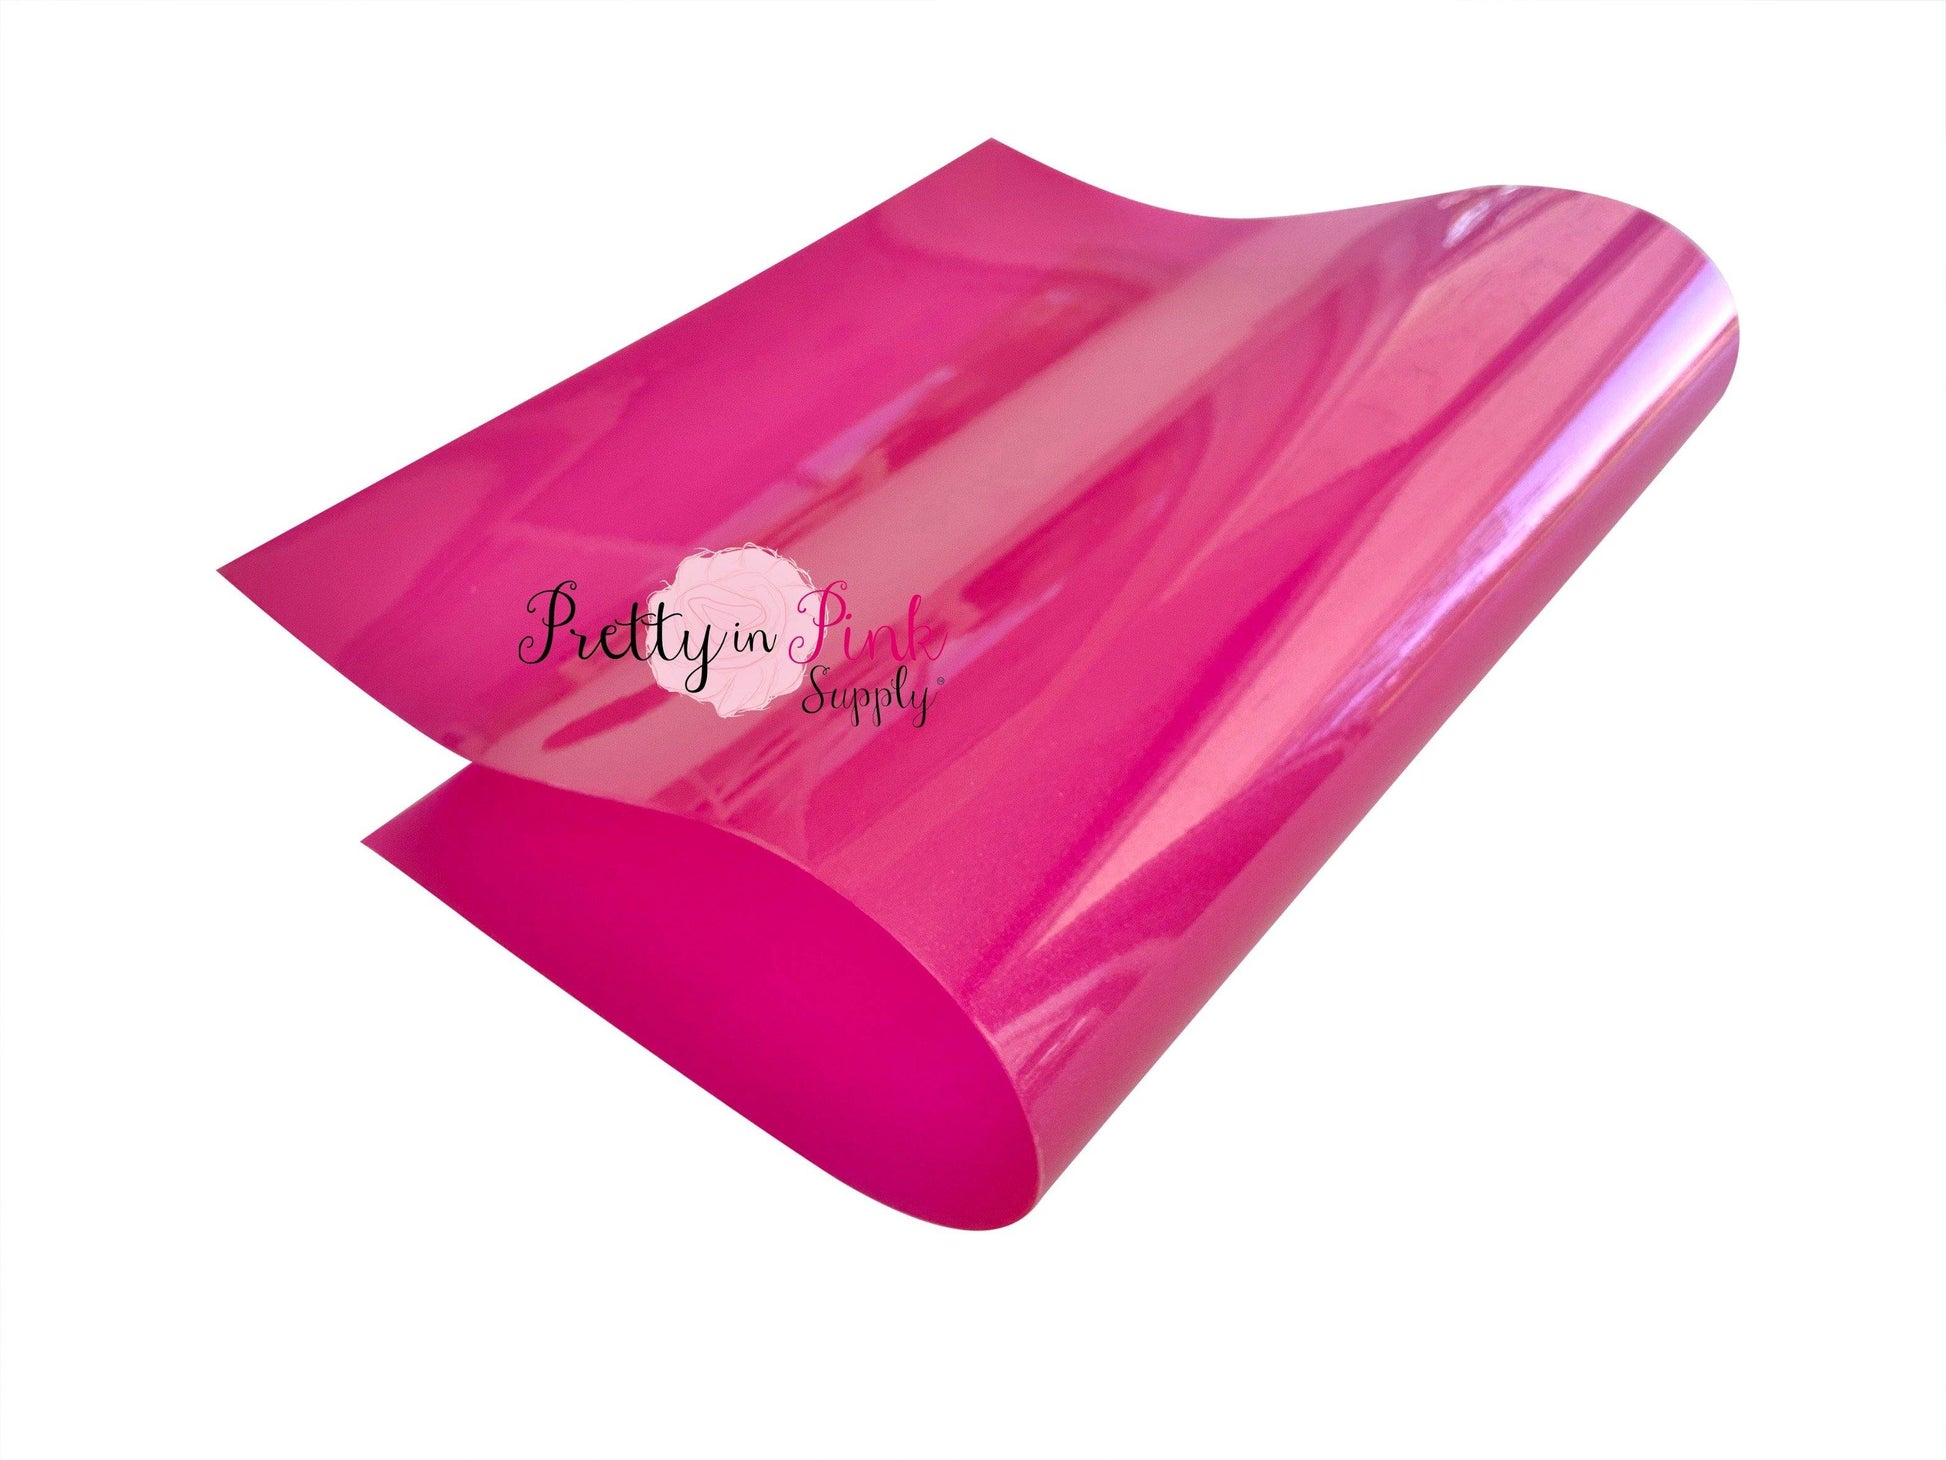 Shimmer Jelly Sheets - Pretty in Pink Supply